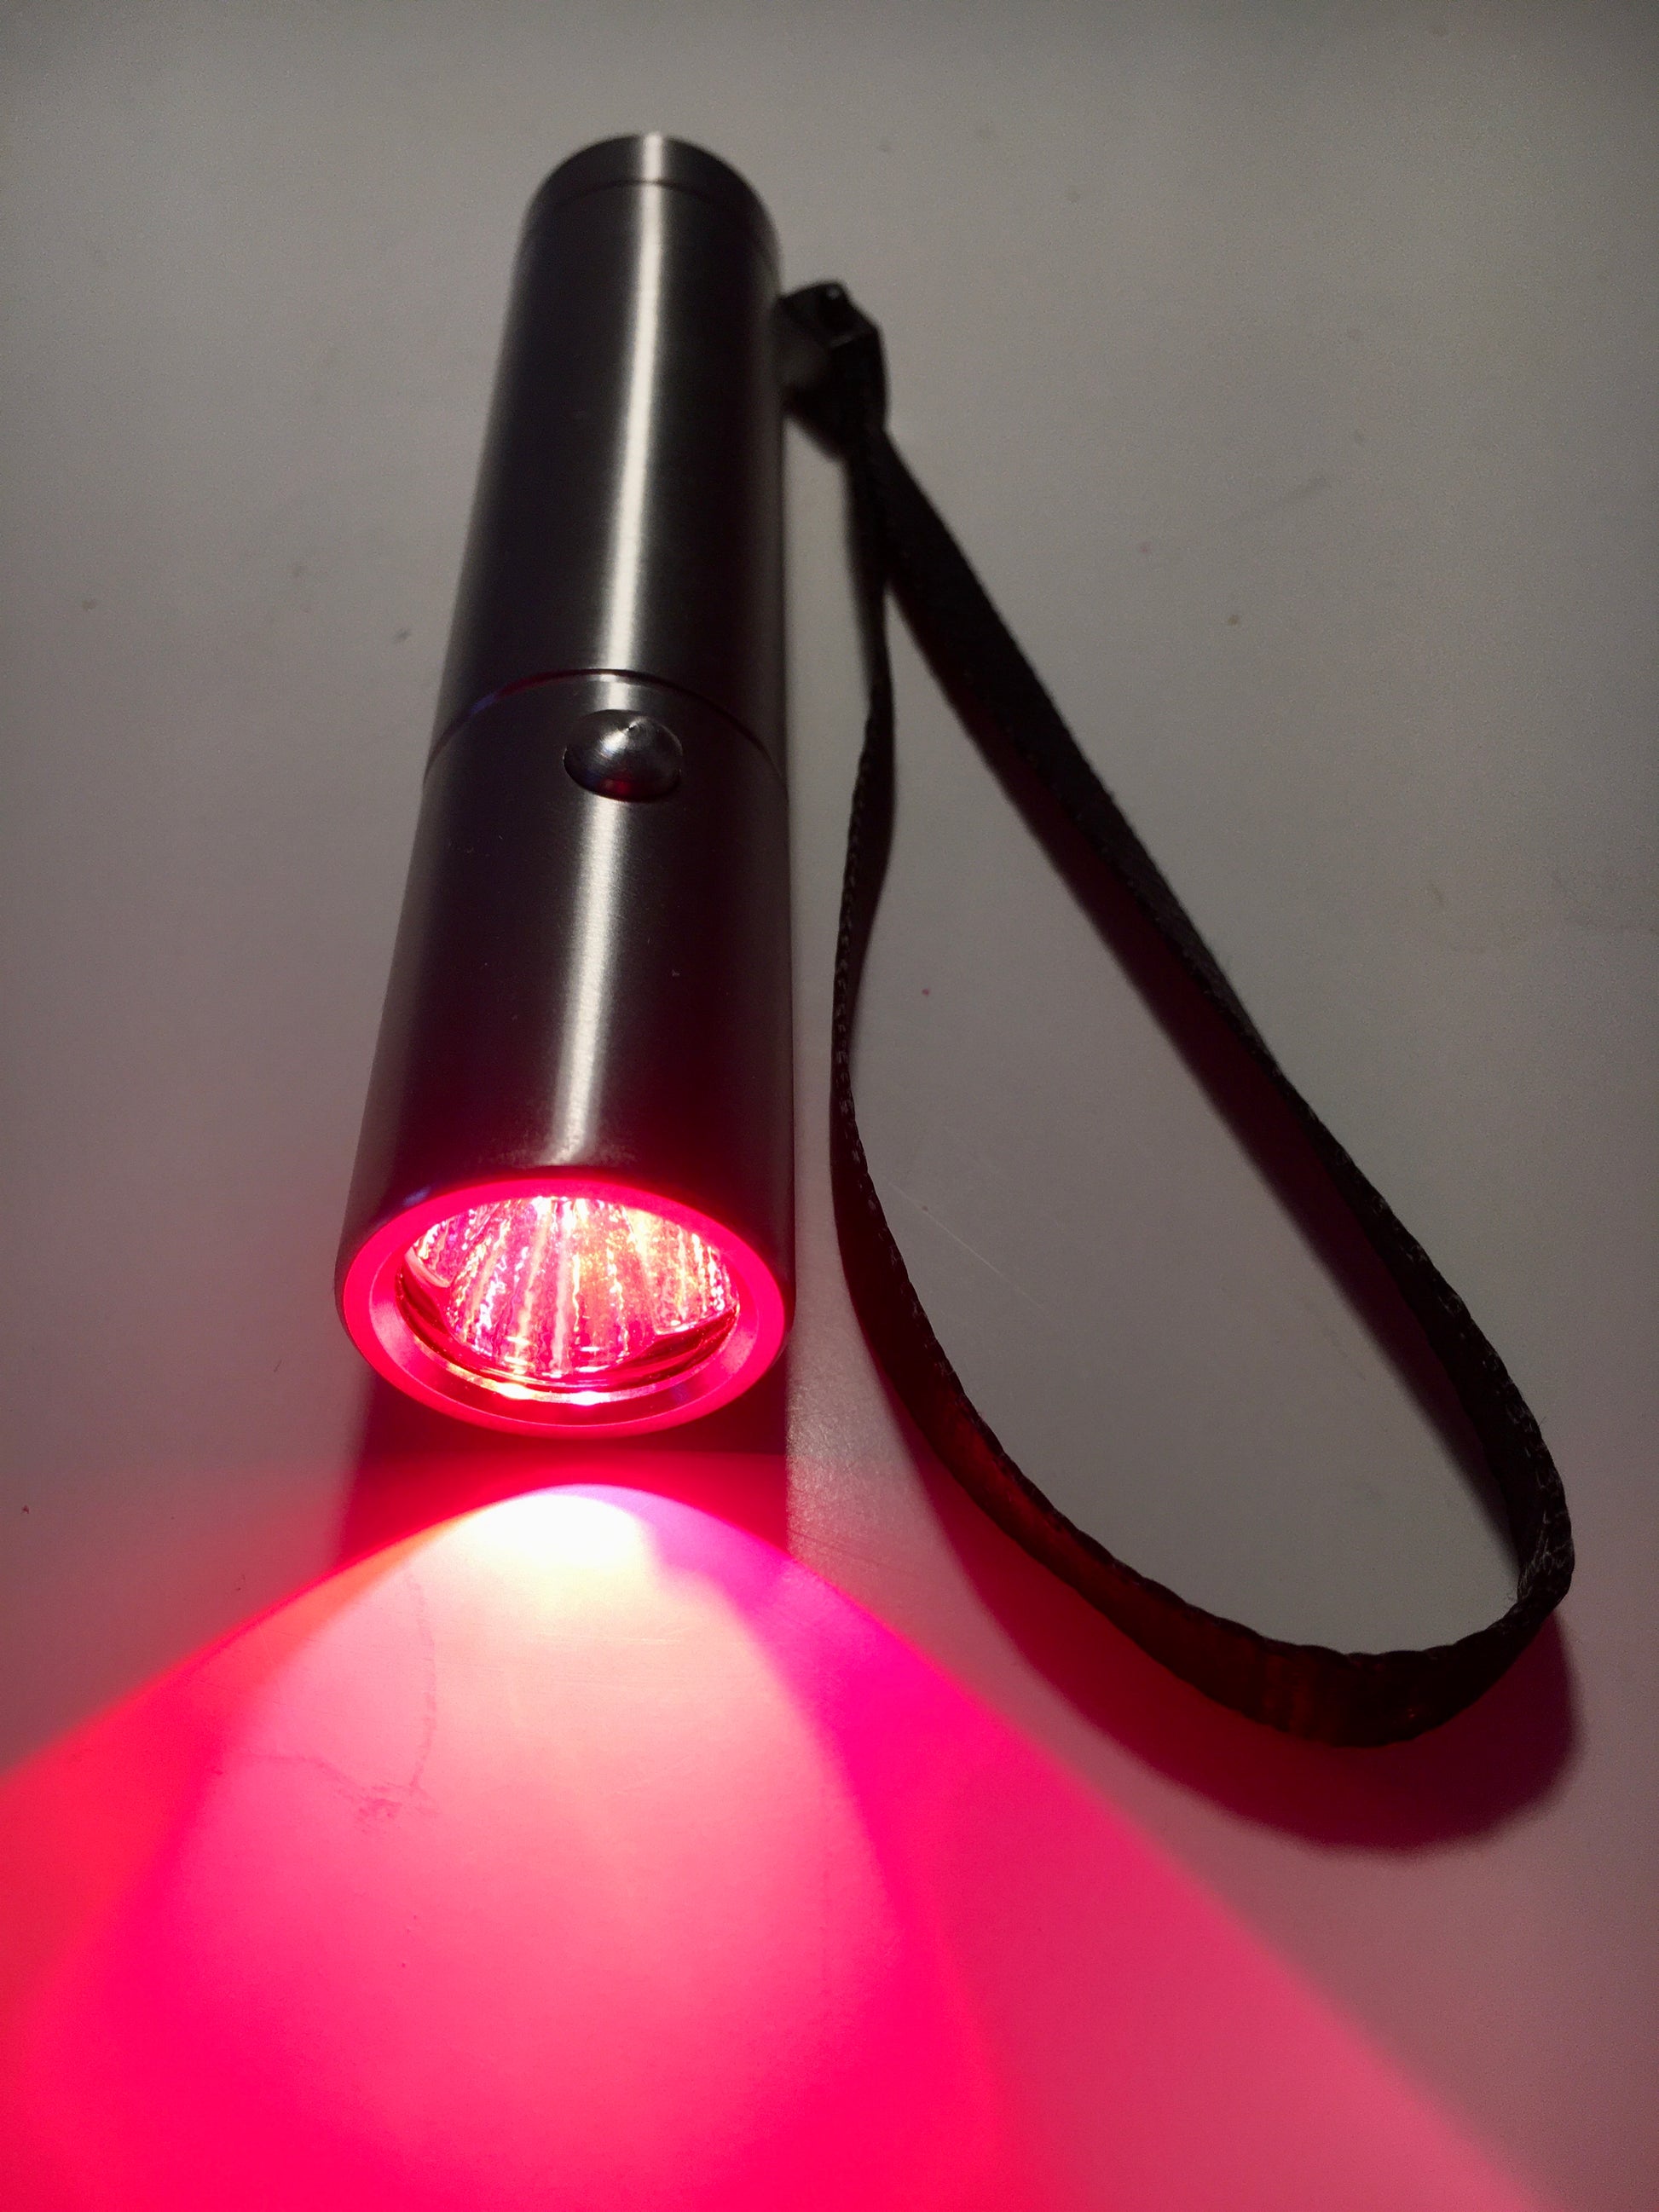 Therapy Torch - Home Light Therapy